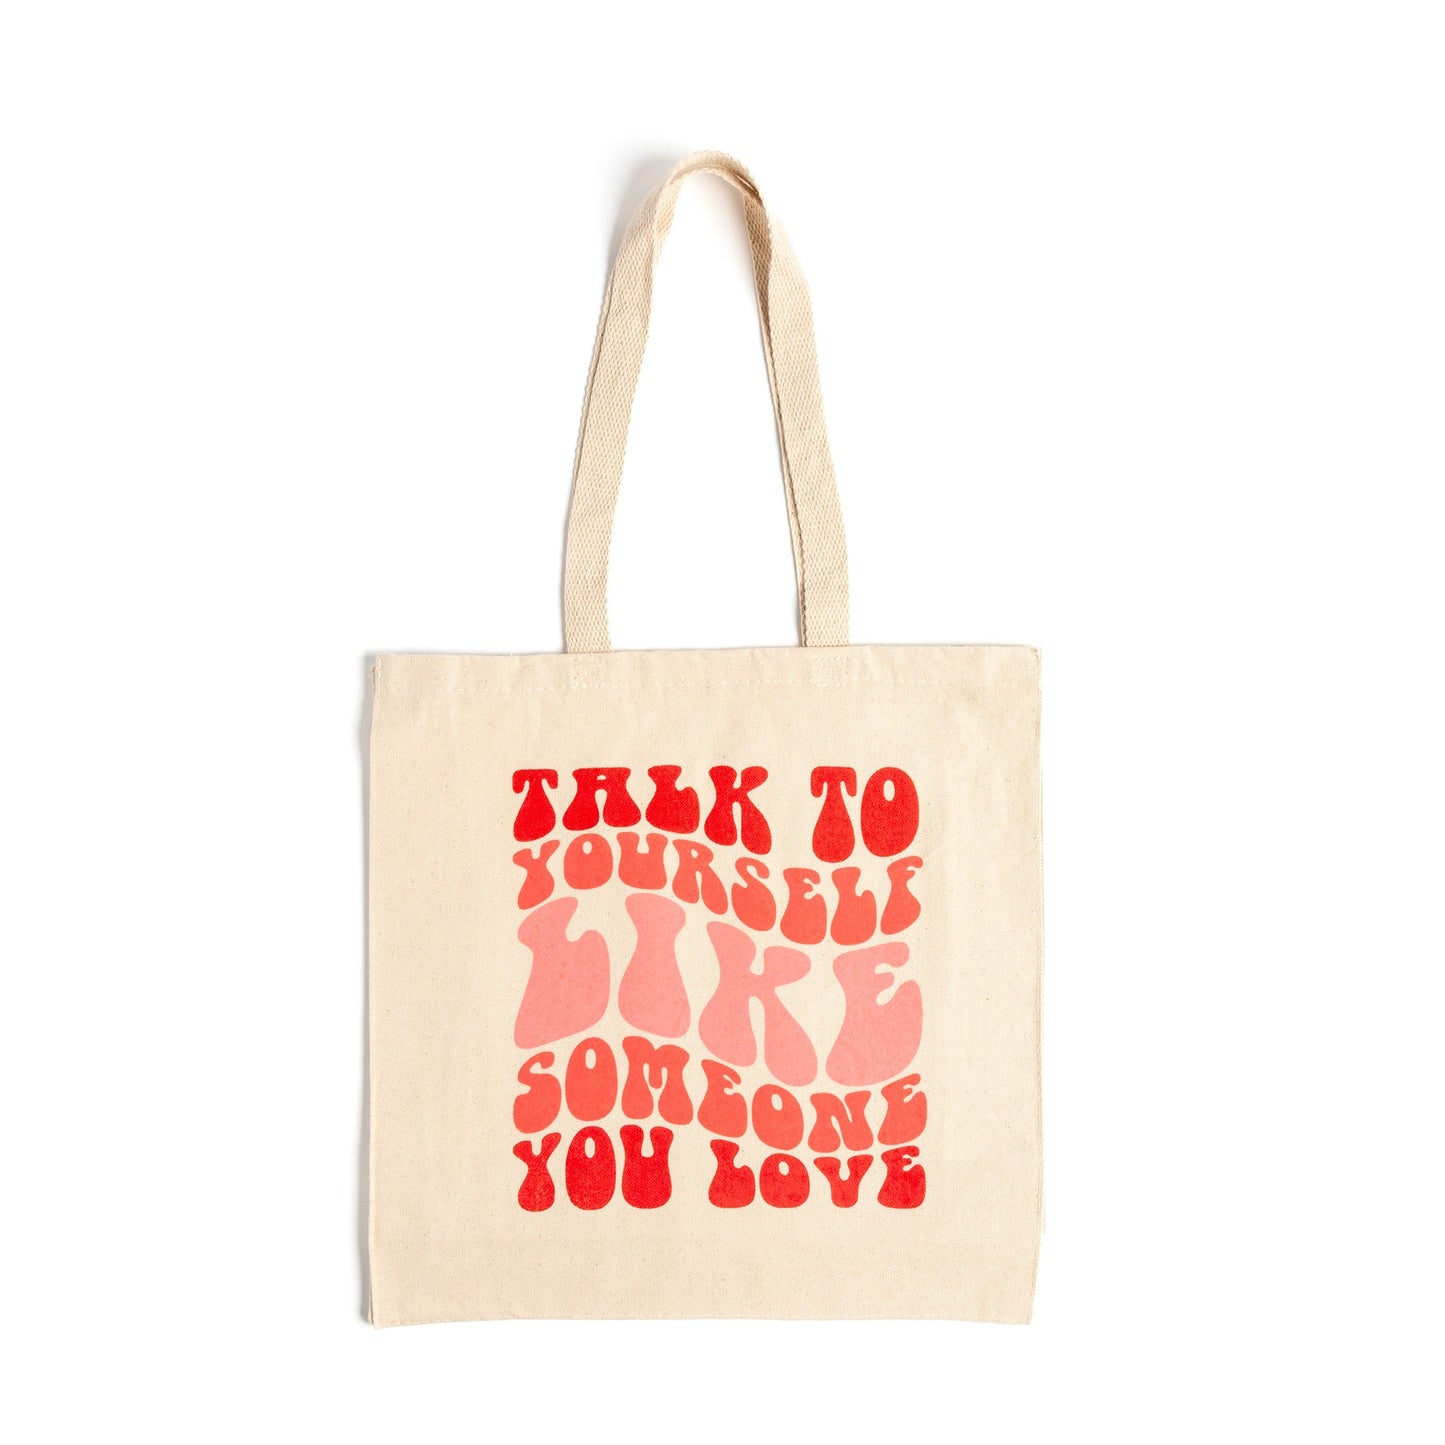 Someone You Love Tote Bag Wear The Peace